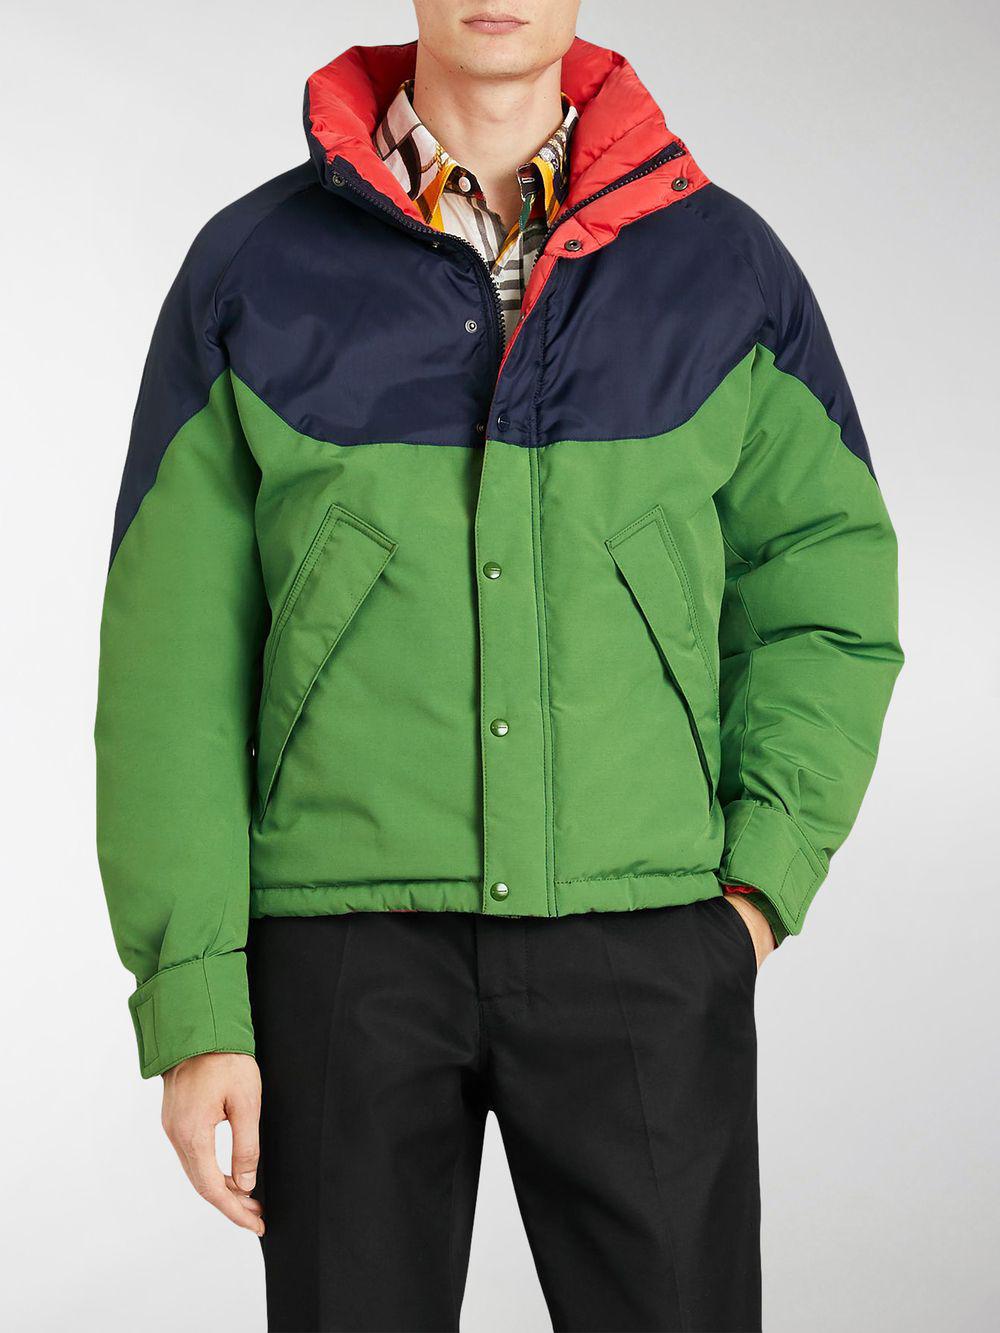 analyse Skibform Martyr Burberry Synthetic Tri-tone Reversible Jacket in Green for Men - Lyst